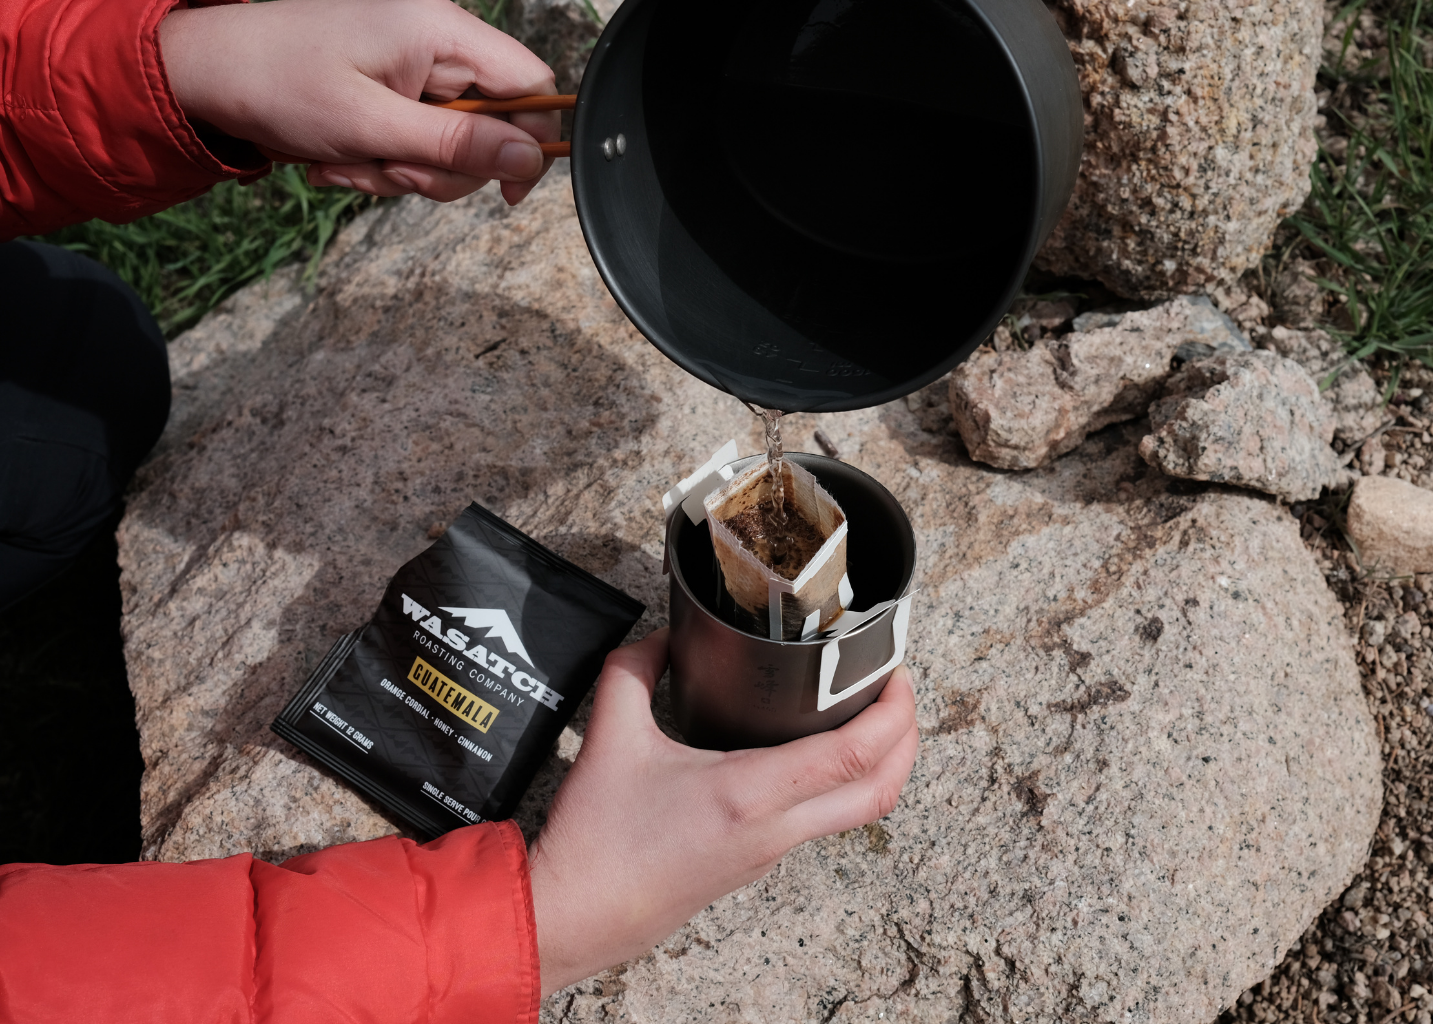 Our 3 Favorite Ways to Make Coffee While Camping